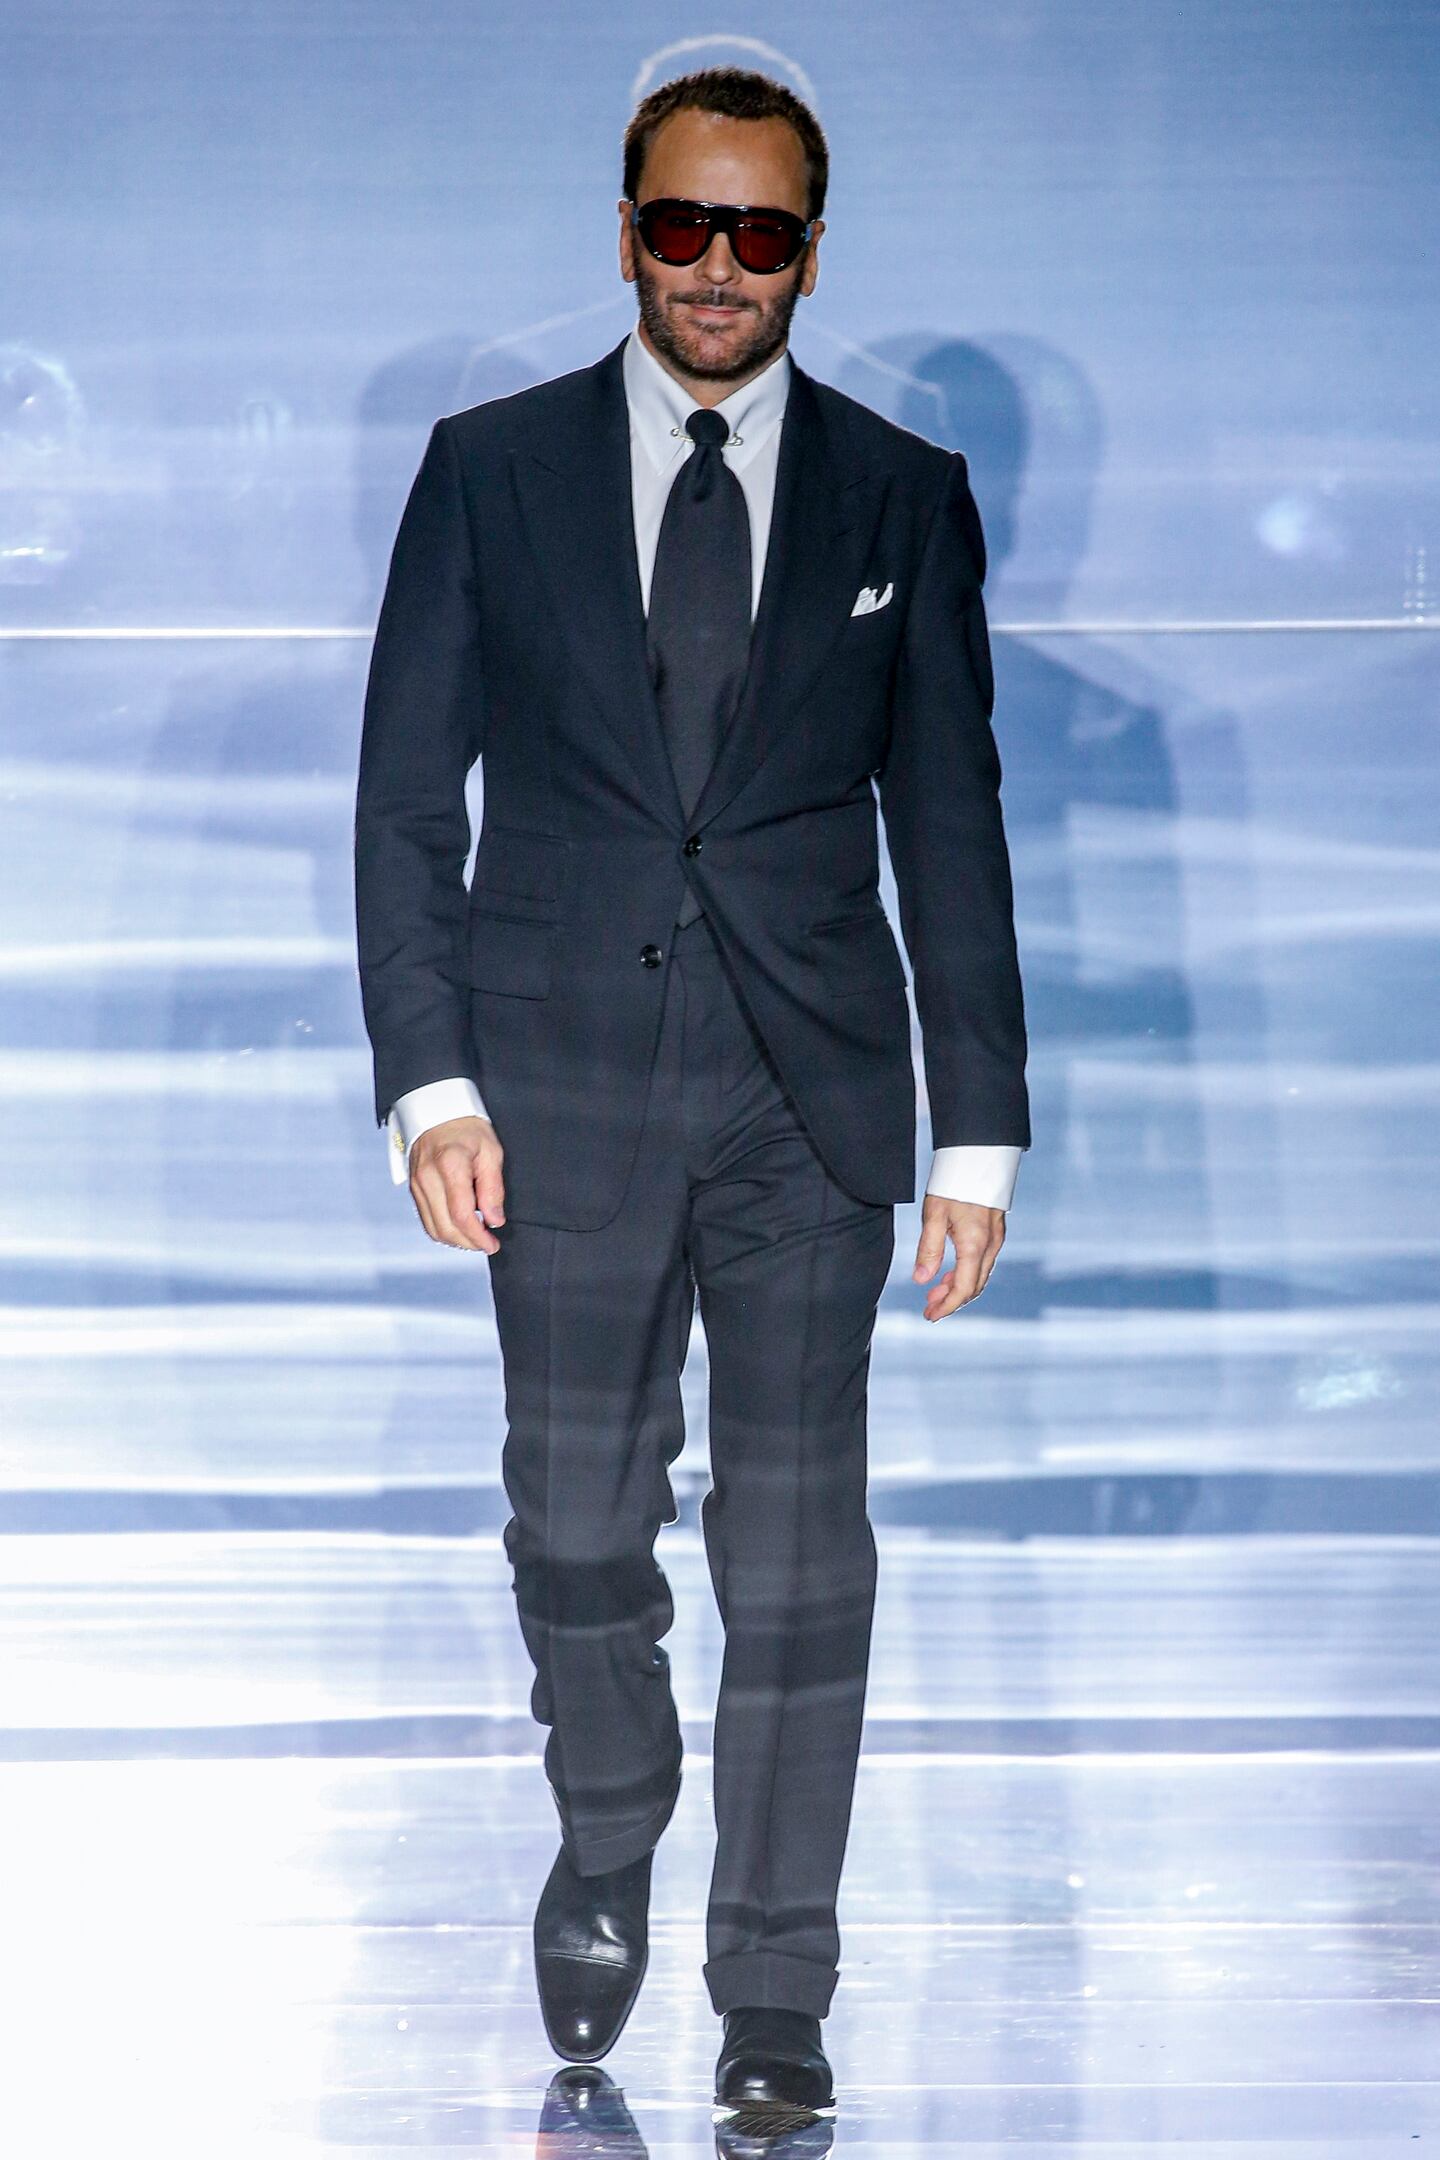 Tom Ford the designer on the runway.